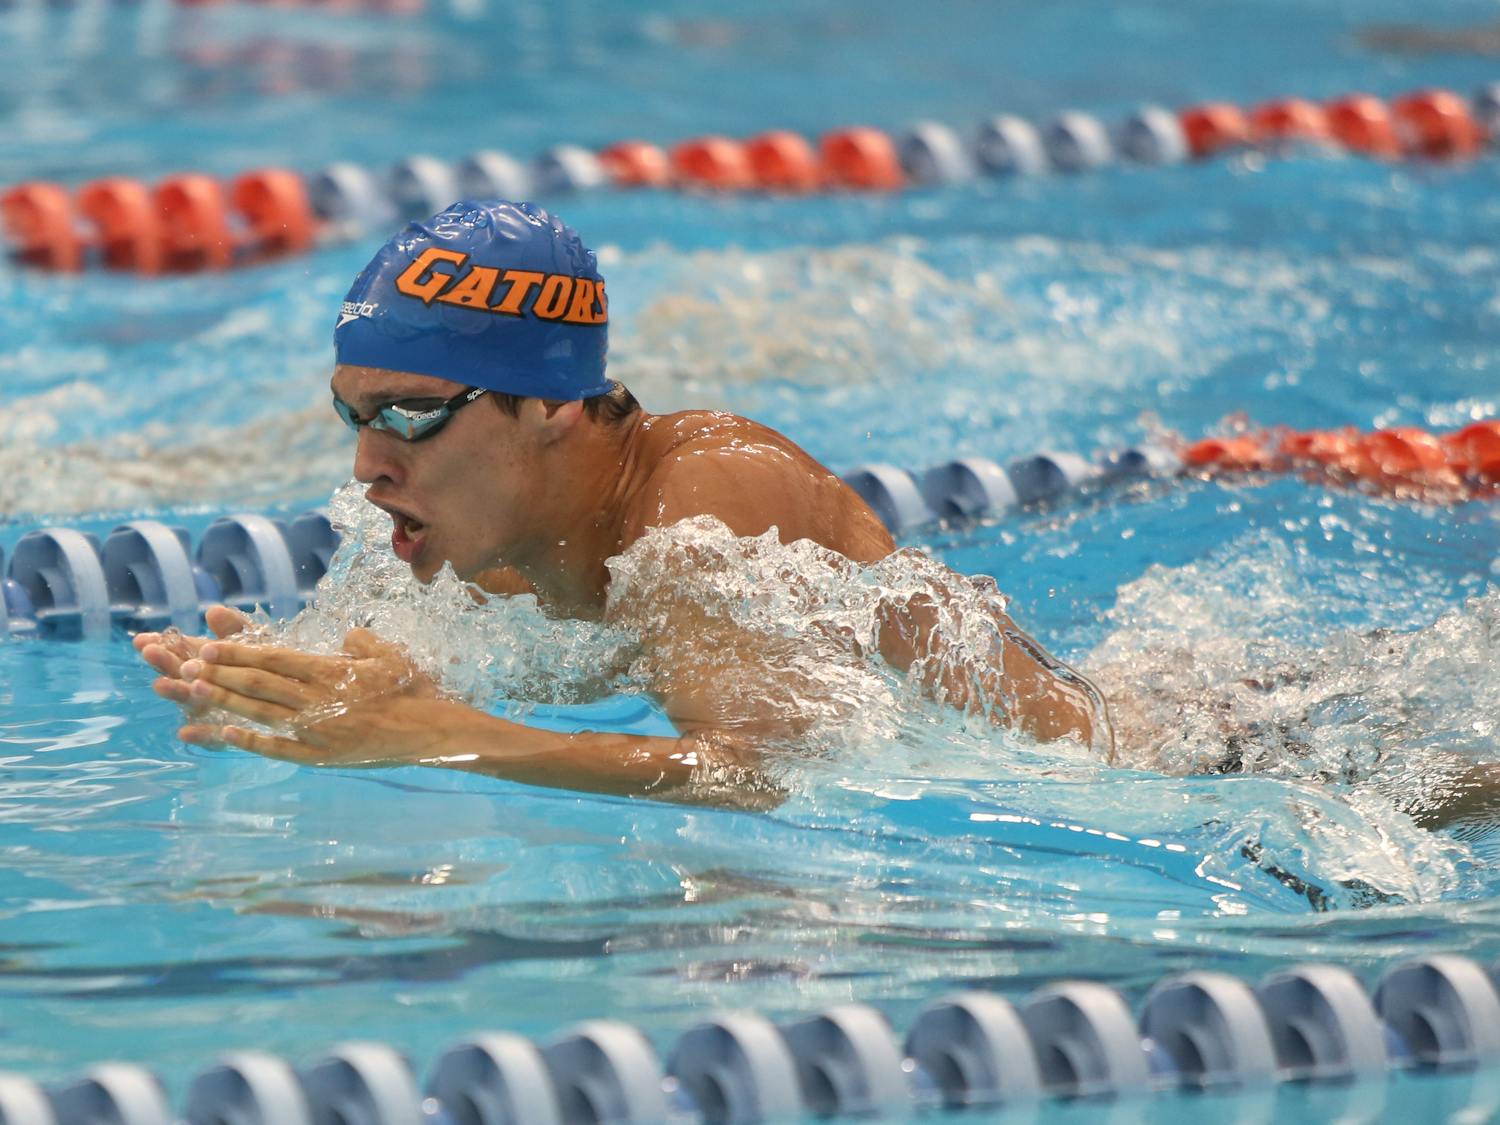 Eduardo Solaeche-Gomez competes in the men's open 400 IM at the Pinch a Penny All-Florida Invitation at the Stephen C. O'Connell Center on Sept. 28, 2013.